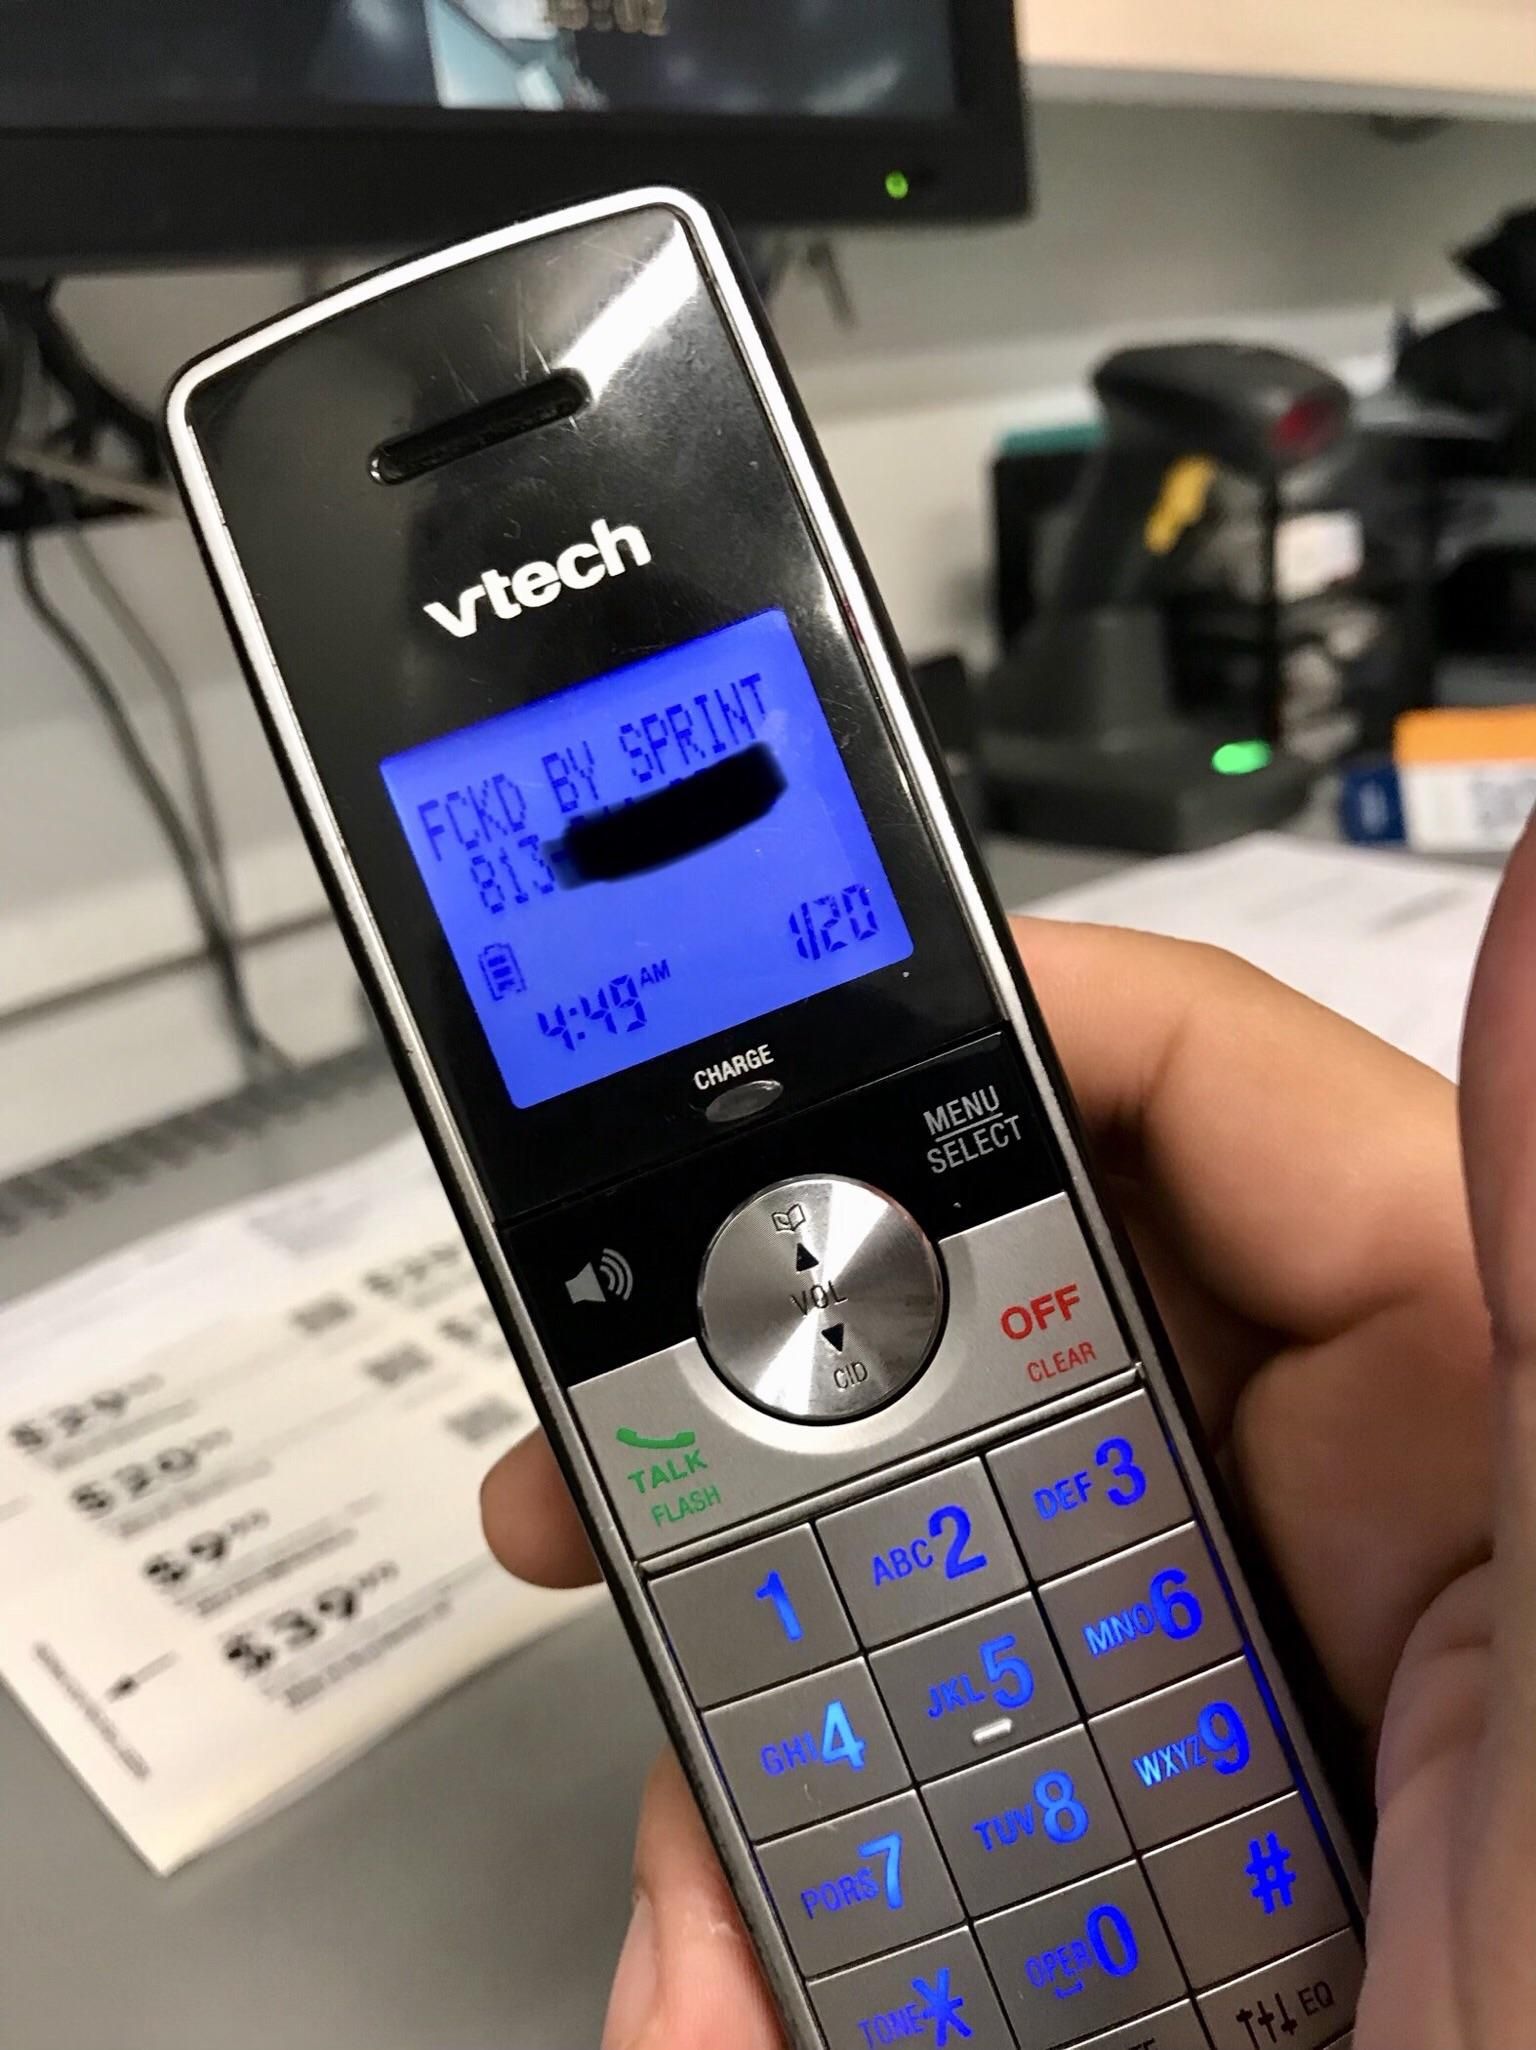 Had an interesting Caller ID come up at work today.